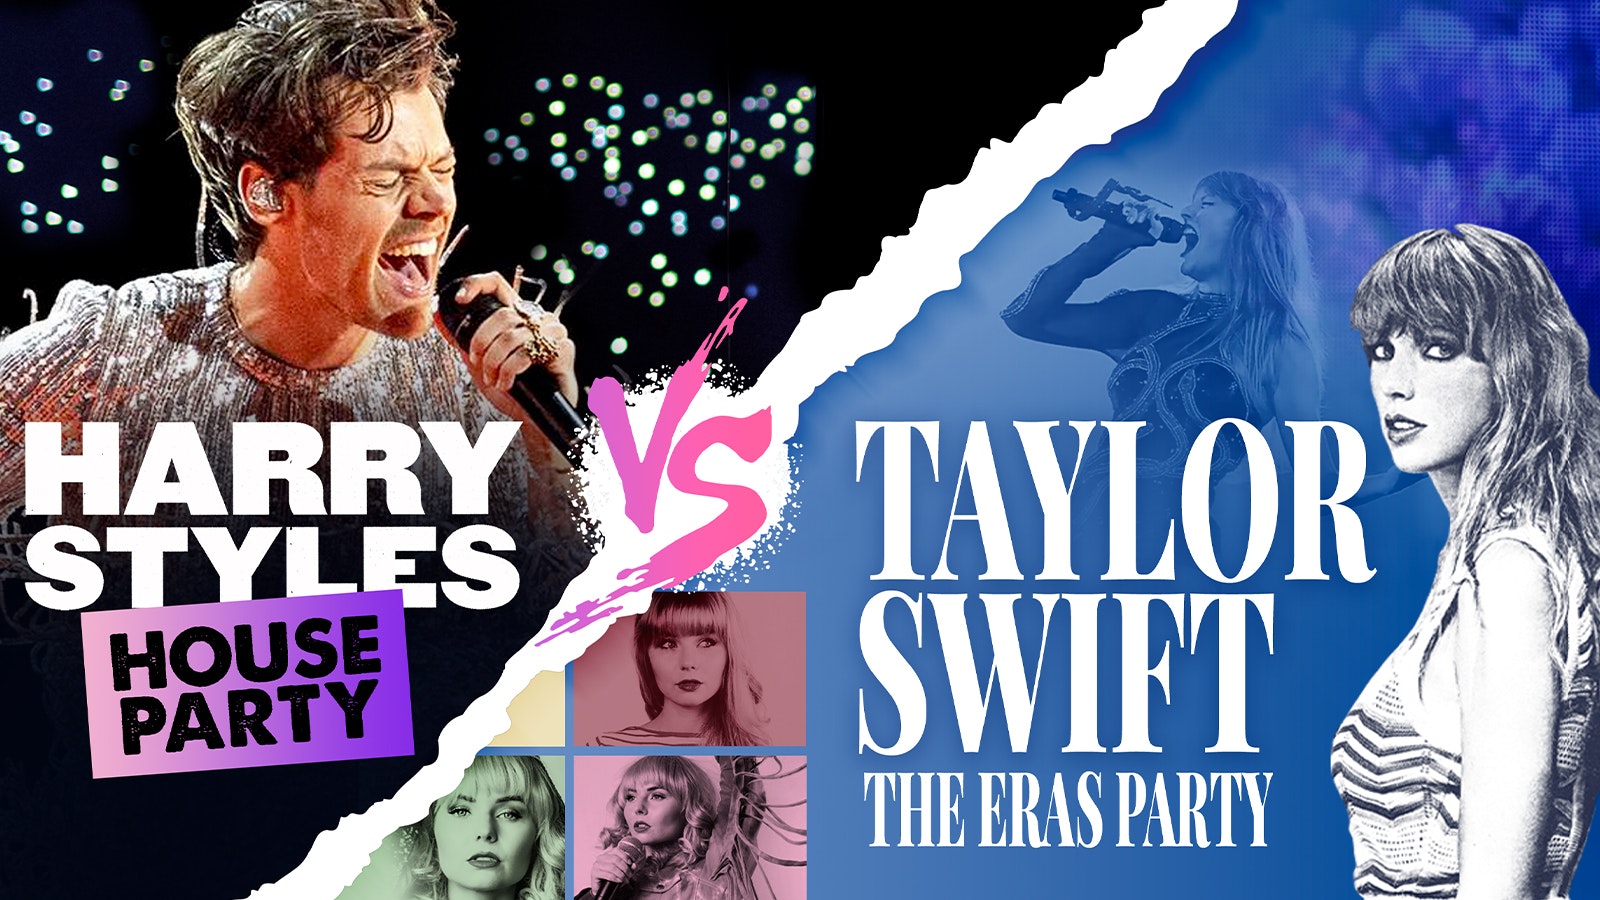 HARRY STYLES HOUSE PARTY VS TAYLOR SWIFT THE ERAS PARTY 🐍